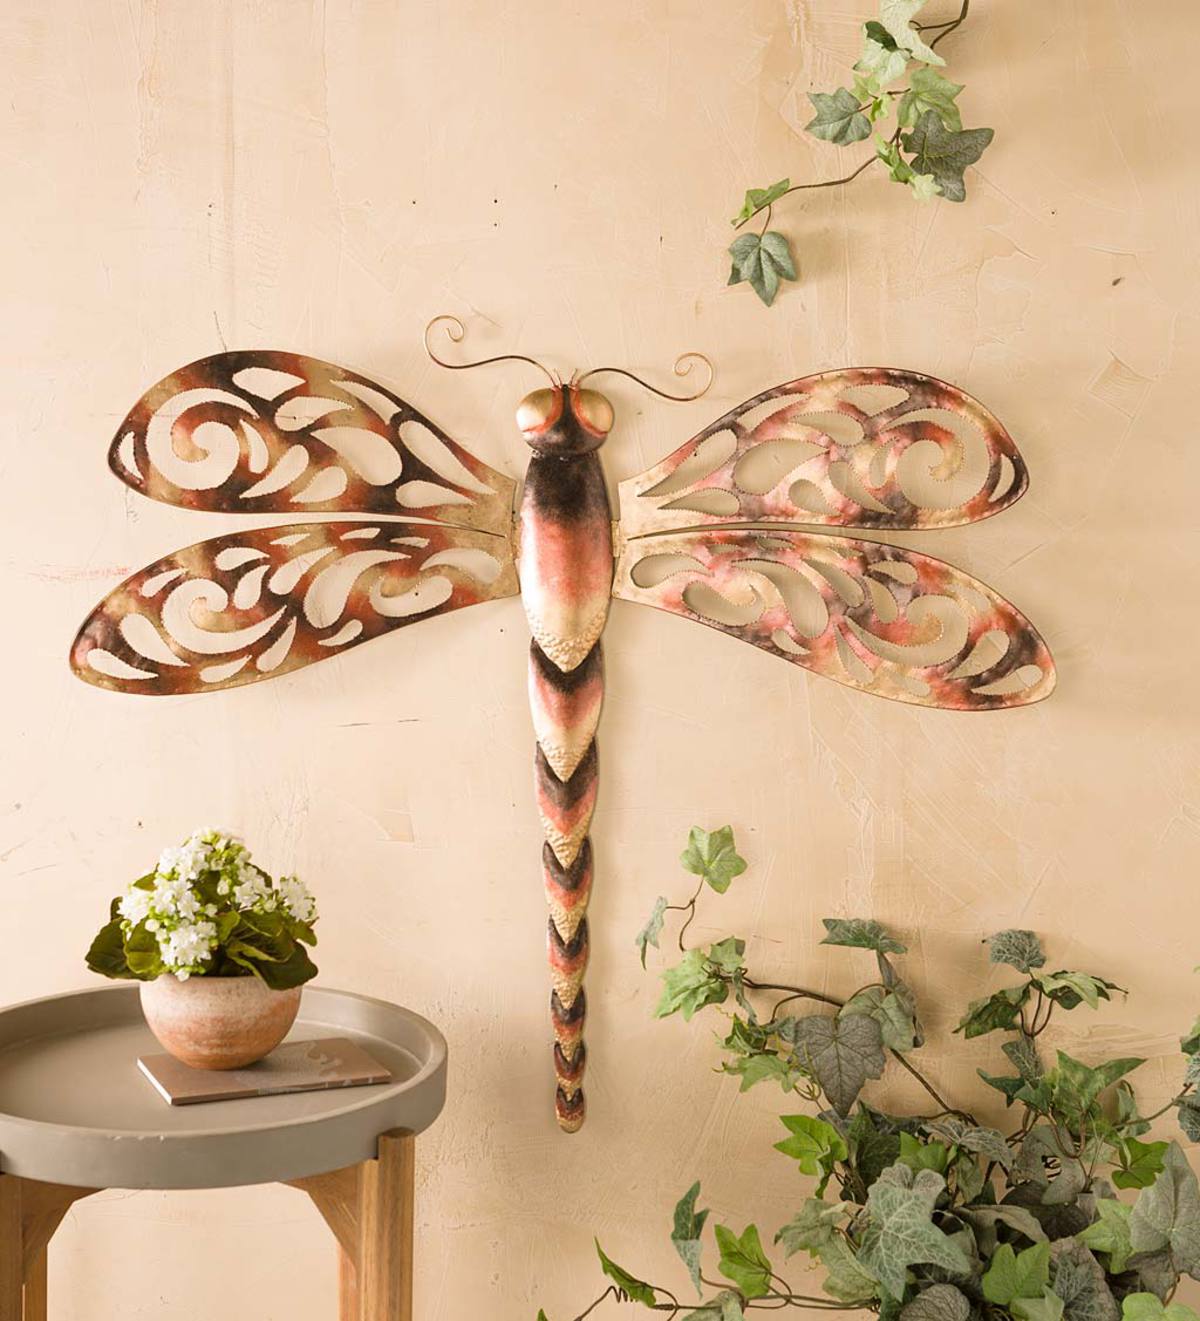 Metal Dragonfly Artwork Wall Decoration Garden Outdoor Home Decor Yard Statues 